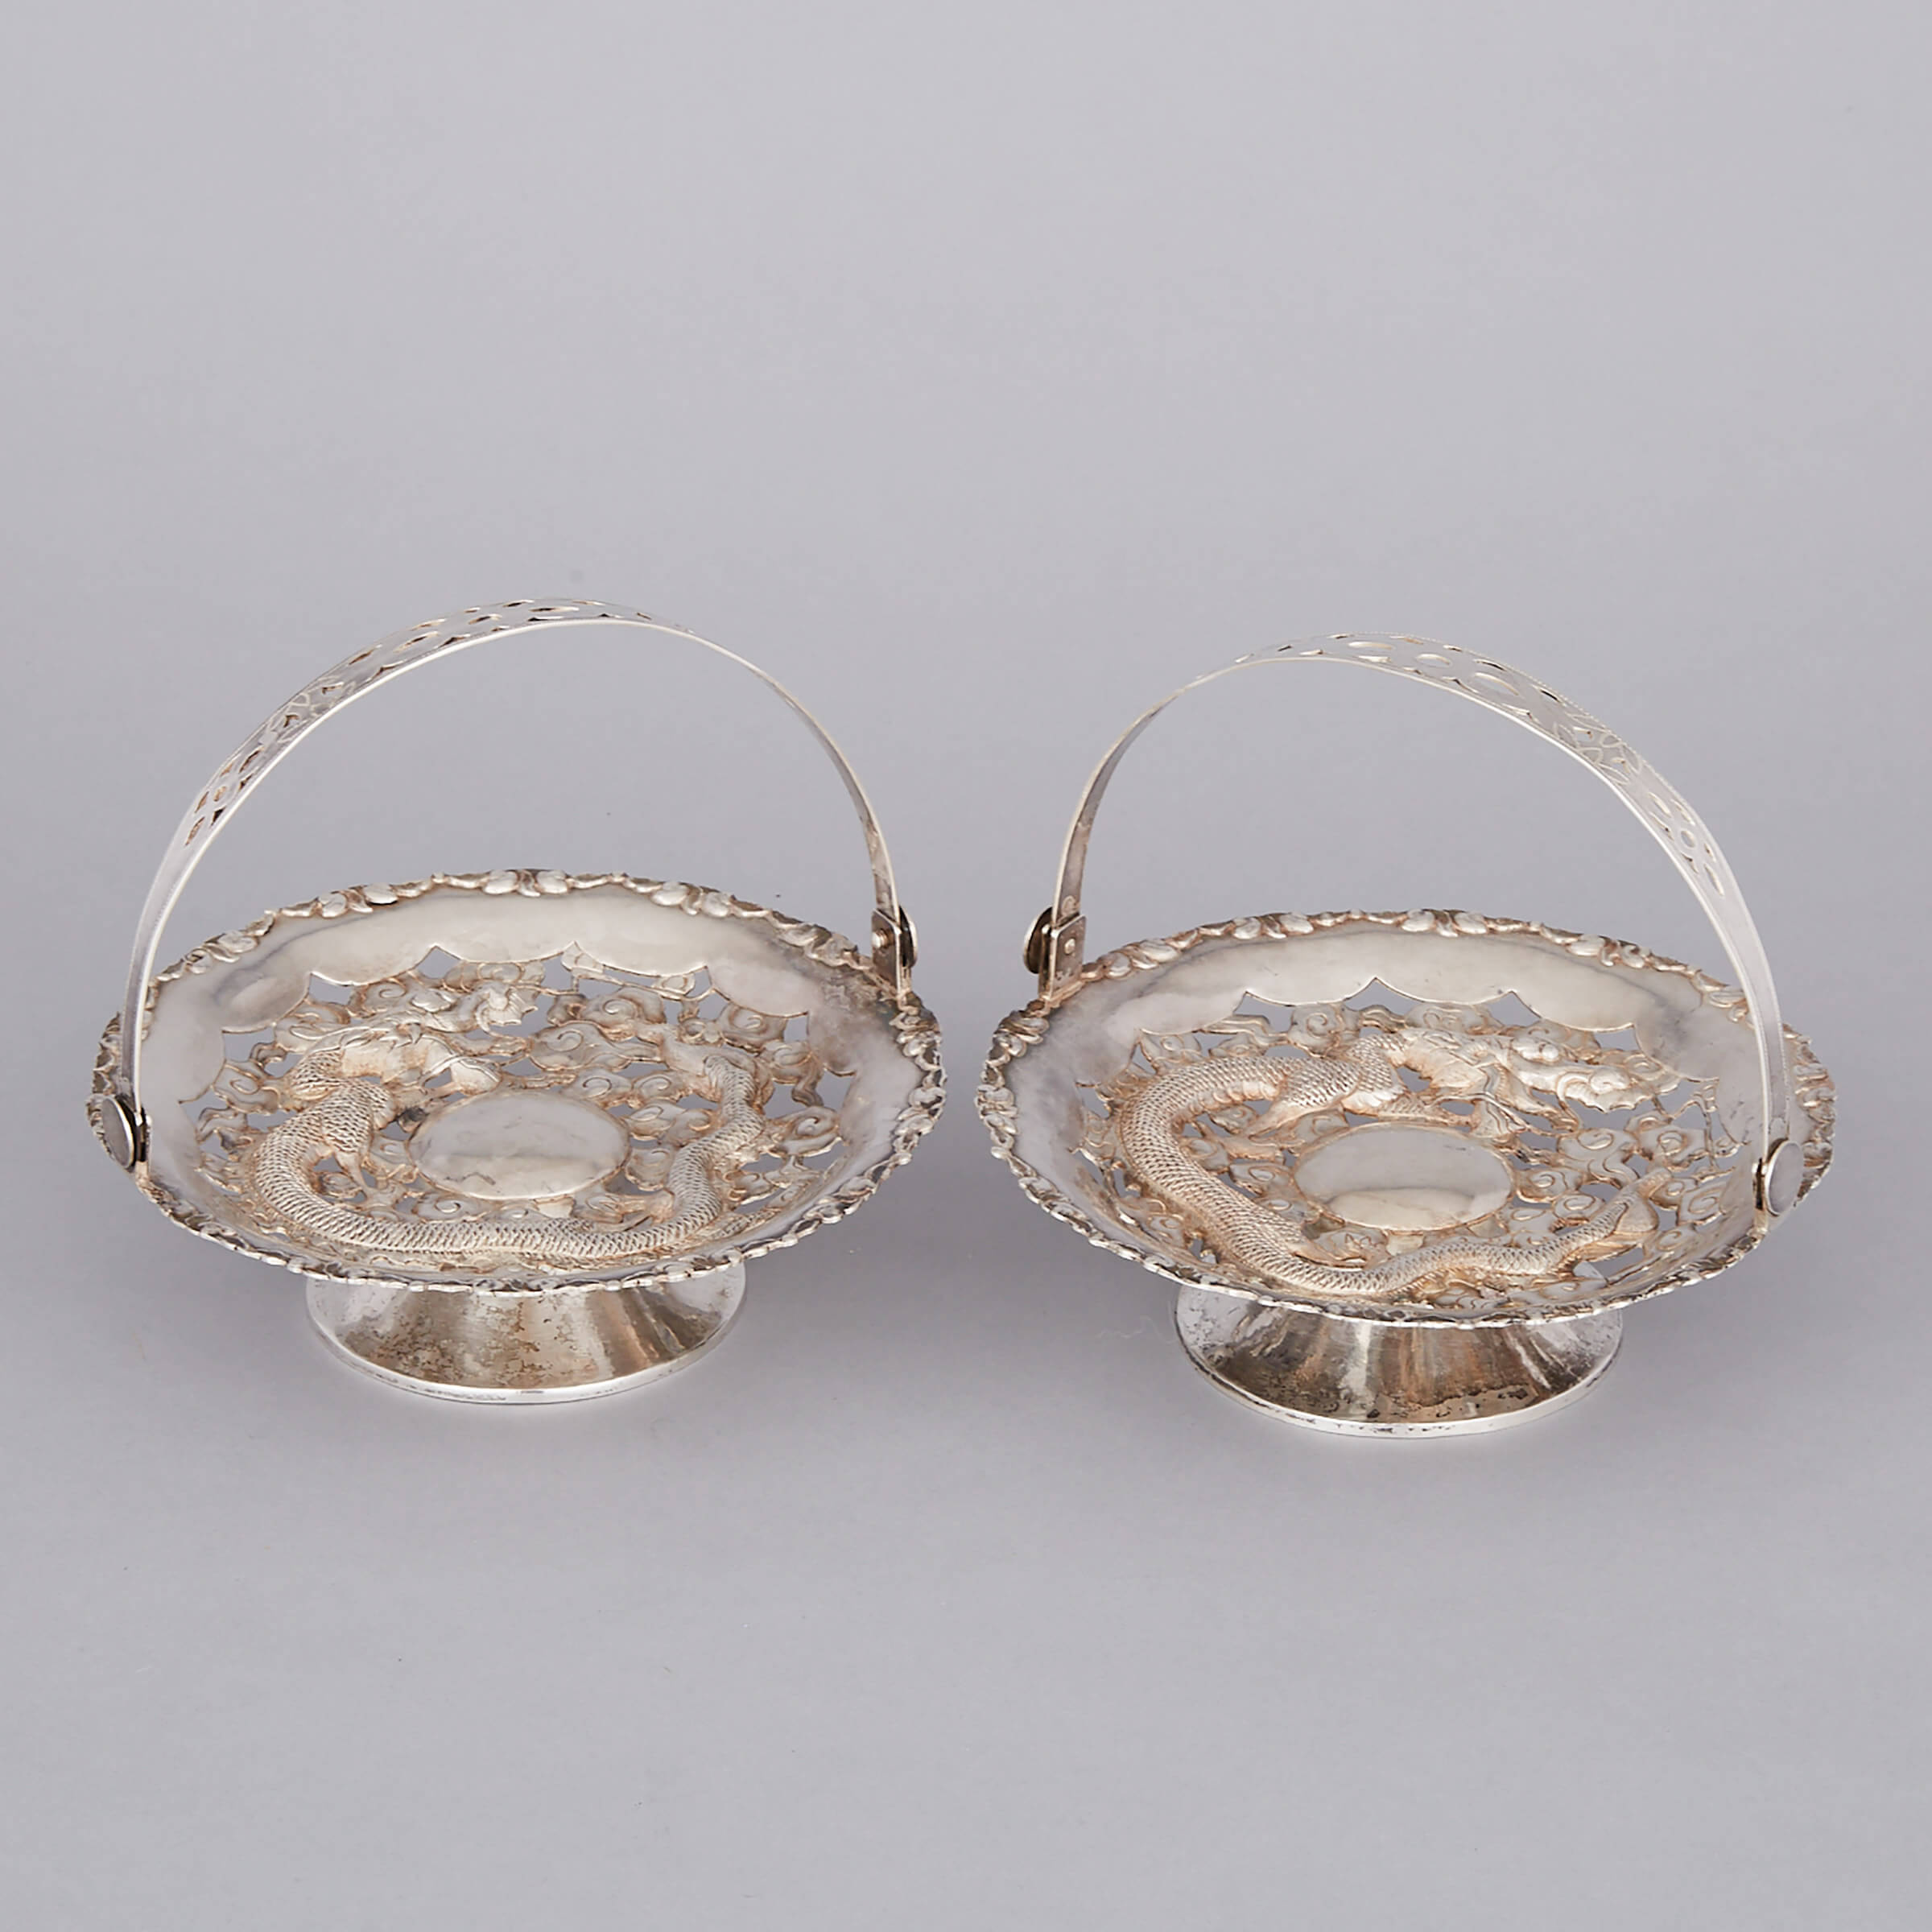 Pair of Chinese Export Silver Baskets, early 20th century